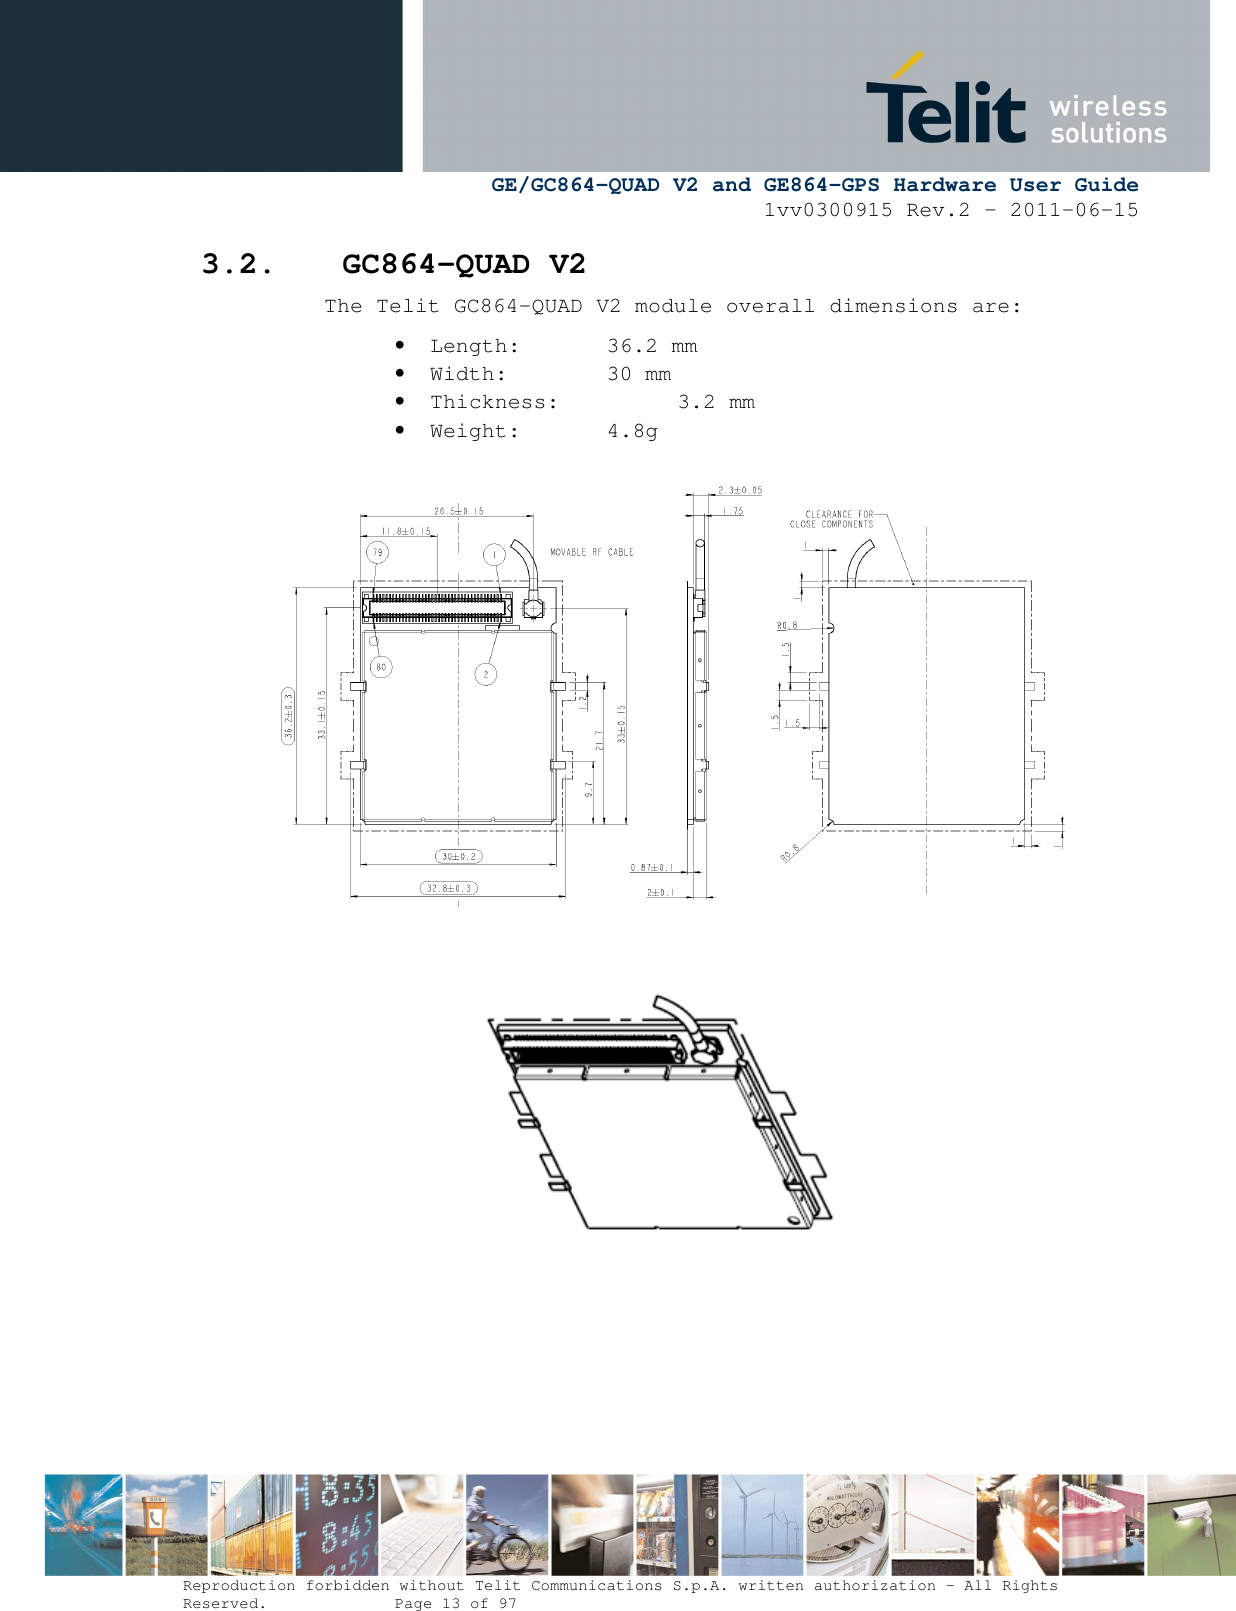      GE/GC864-QUAD V2 and GE864-GPS Hardware User Guide 1vv0300915 Rev.2 – 2011-06-15  Reproduction forbidden without Telit Communications S.p.A. written authorization - All Rights Reserved.    Page 13 of 97  3.2. GC864-QUAD V2 The Telit GC864-QUAD V2 module overall dimensions are: • Length:   36.2 mm • Width:    30 mm • Thickness:    3.2 mm • Weight:    4.8g    